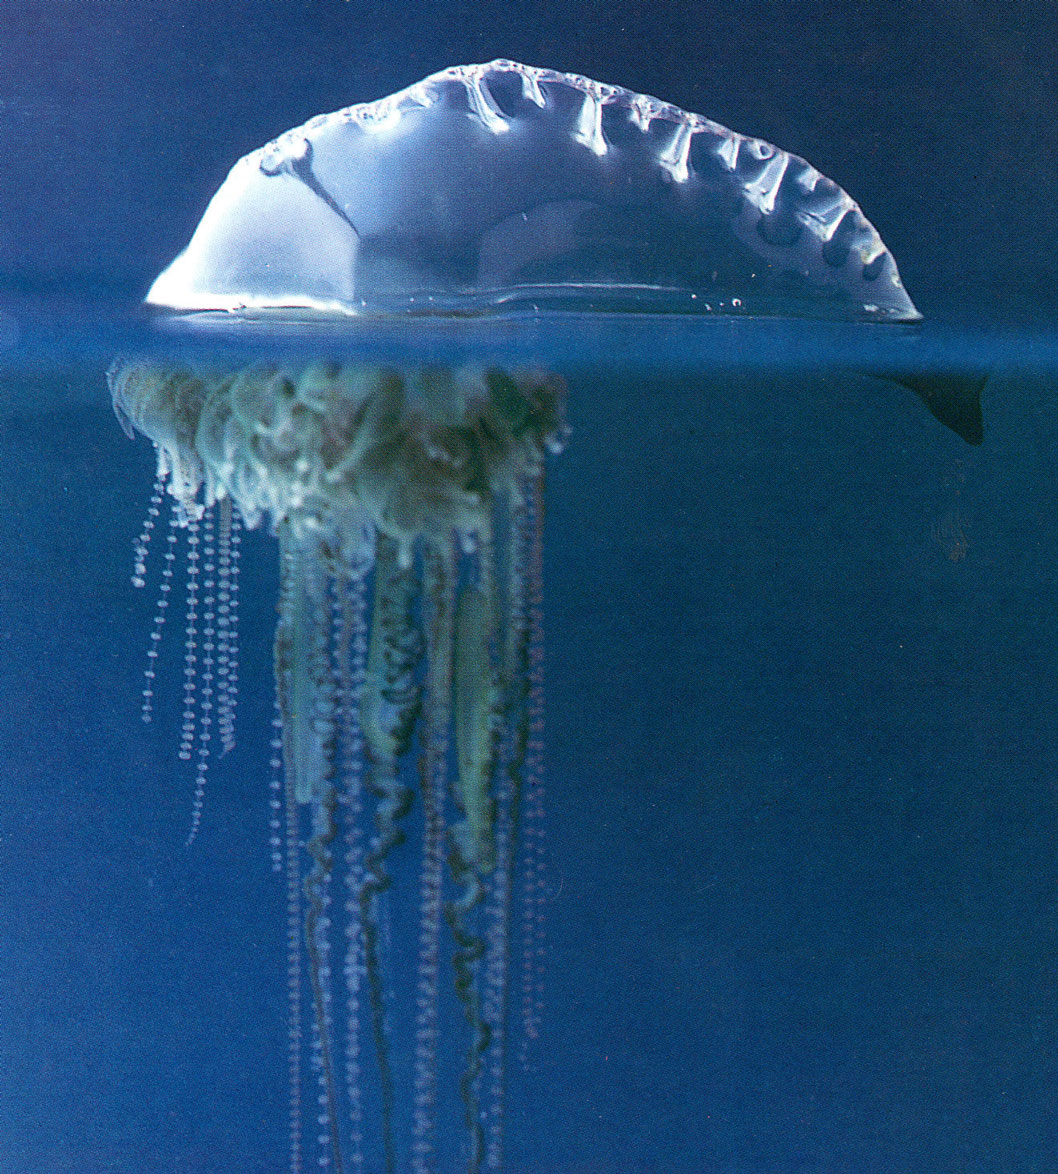 The Portuguese Man-of-War is not a single creature, but a colony of 

four smaller organisms that attach to each other and cannot survive 

independently.